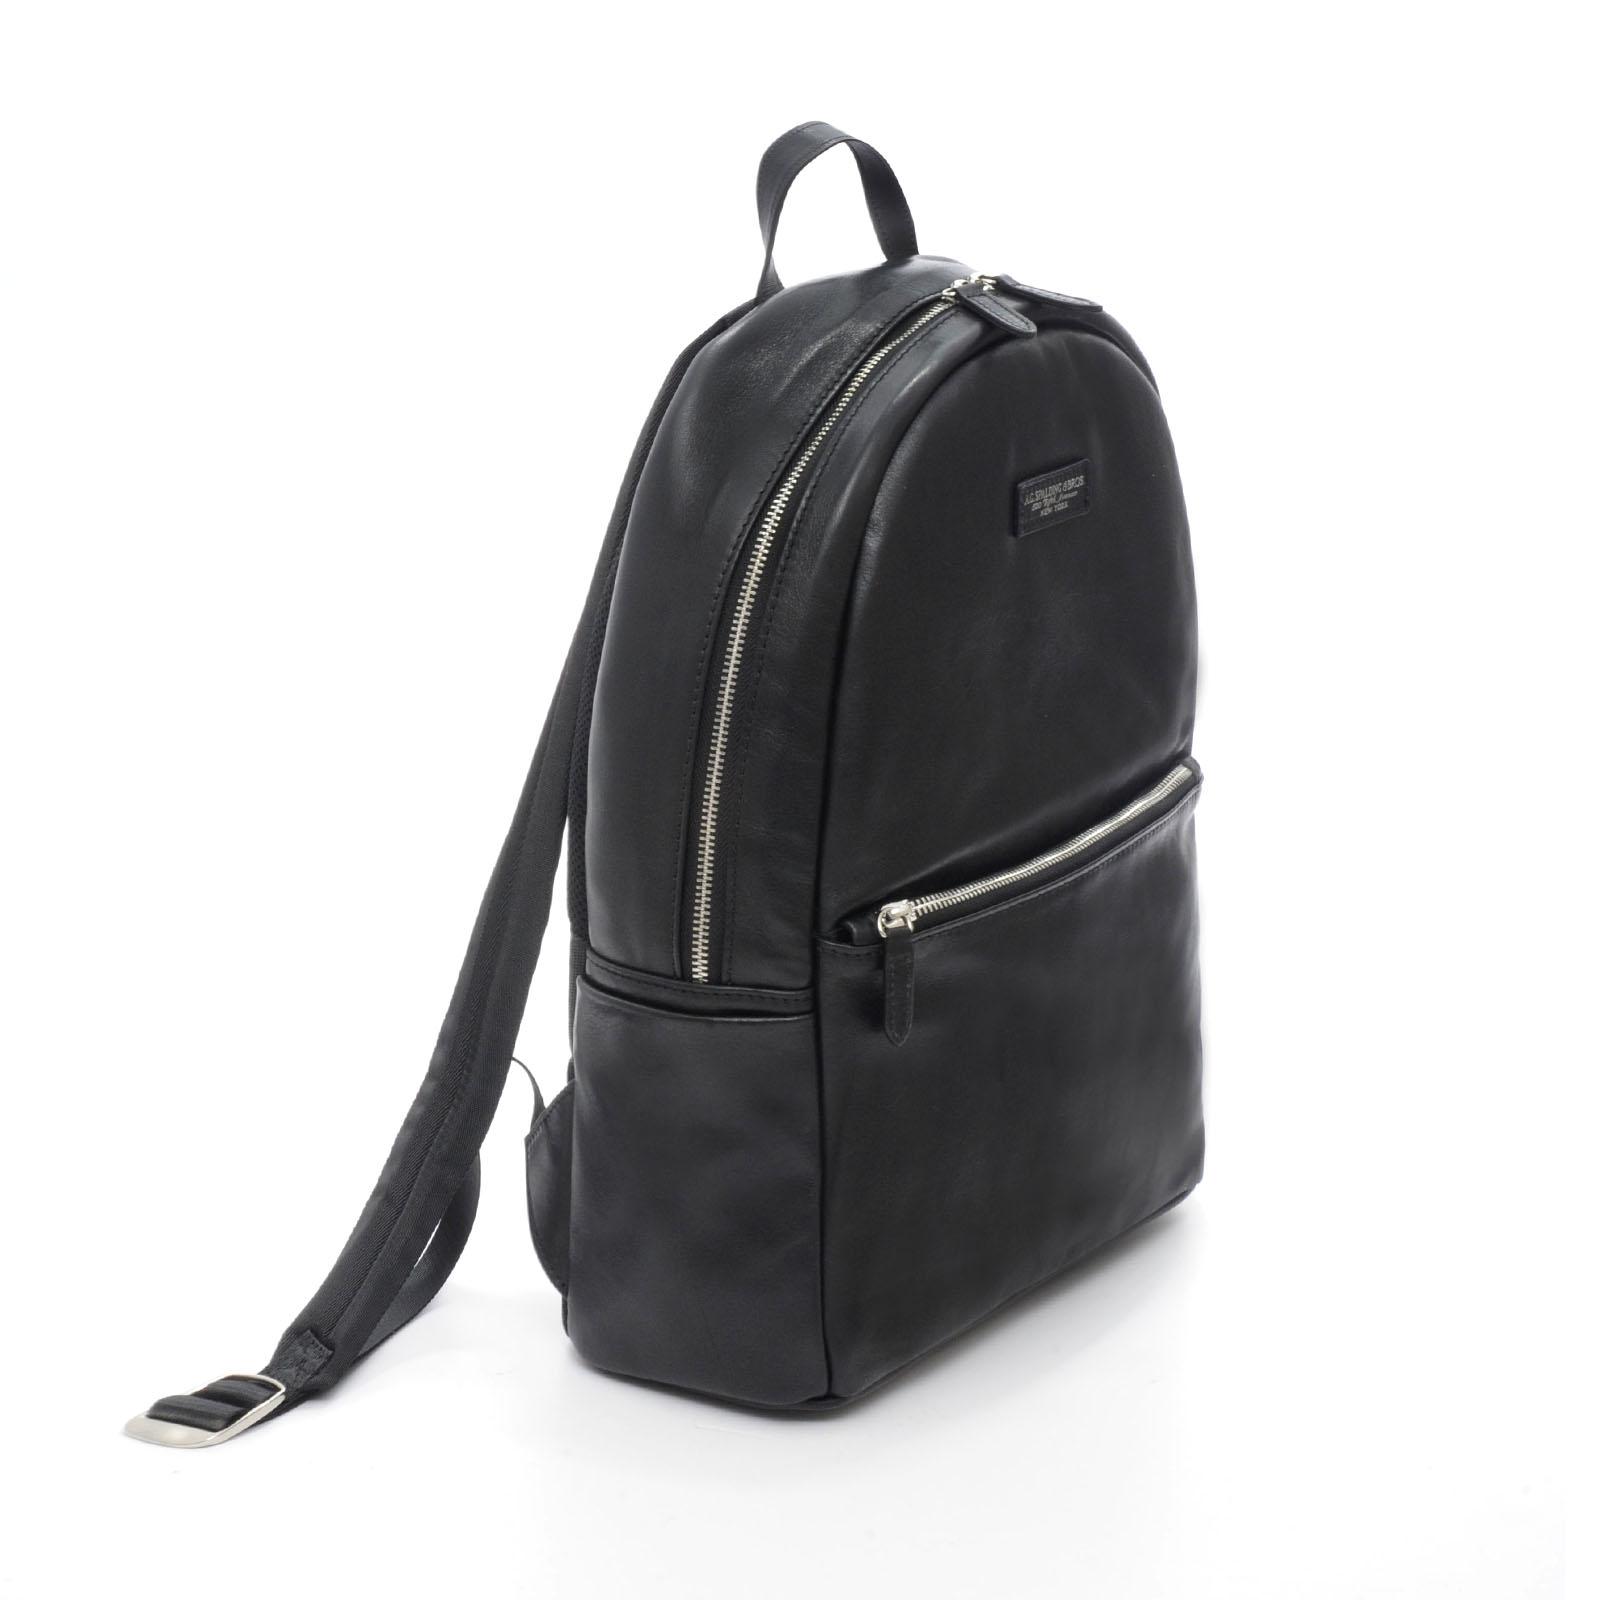 Round Backpack Sot-tech Black 